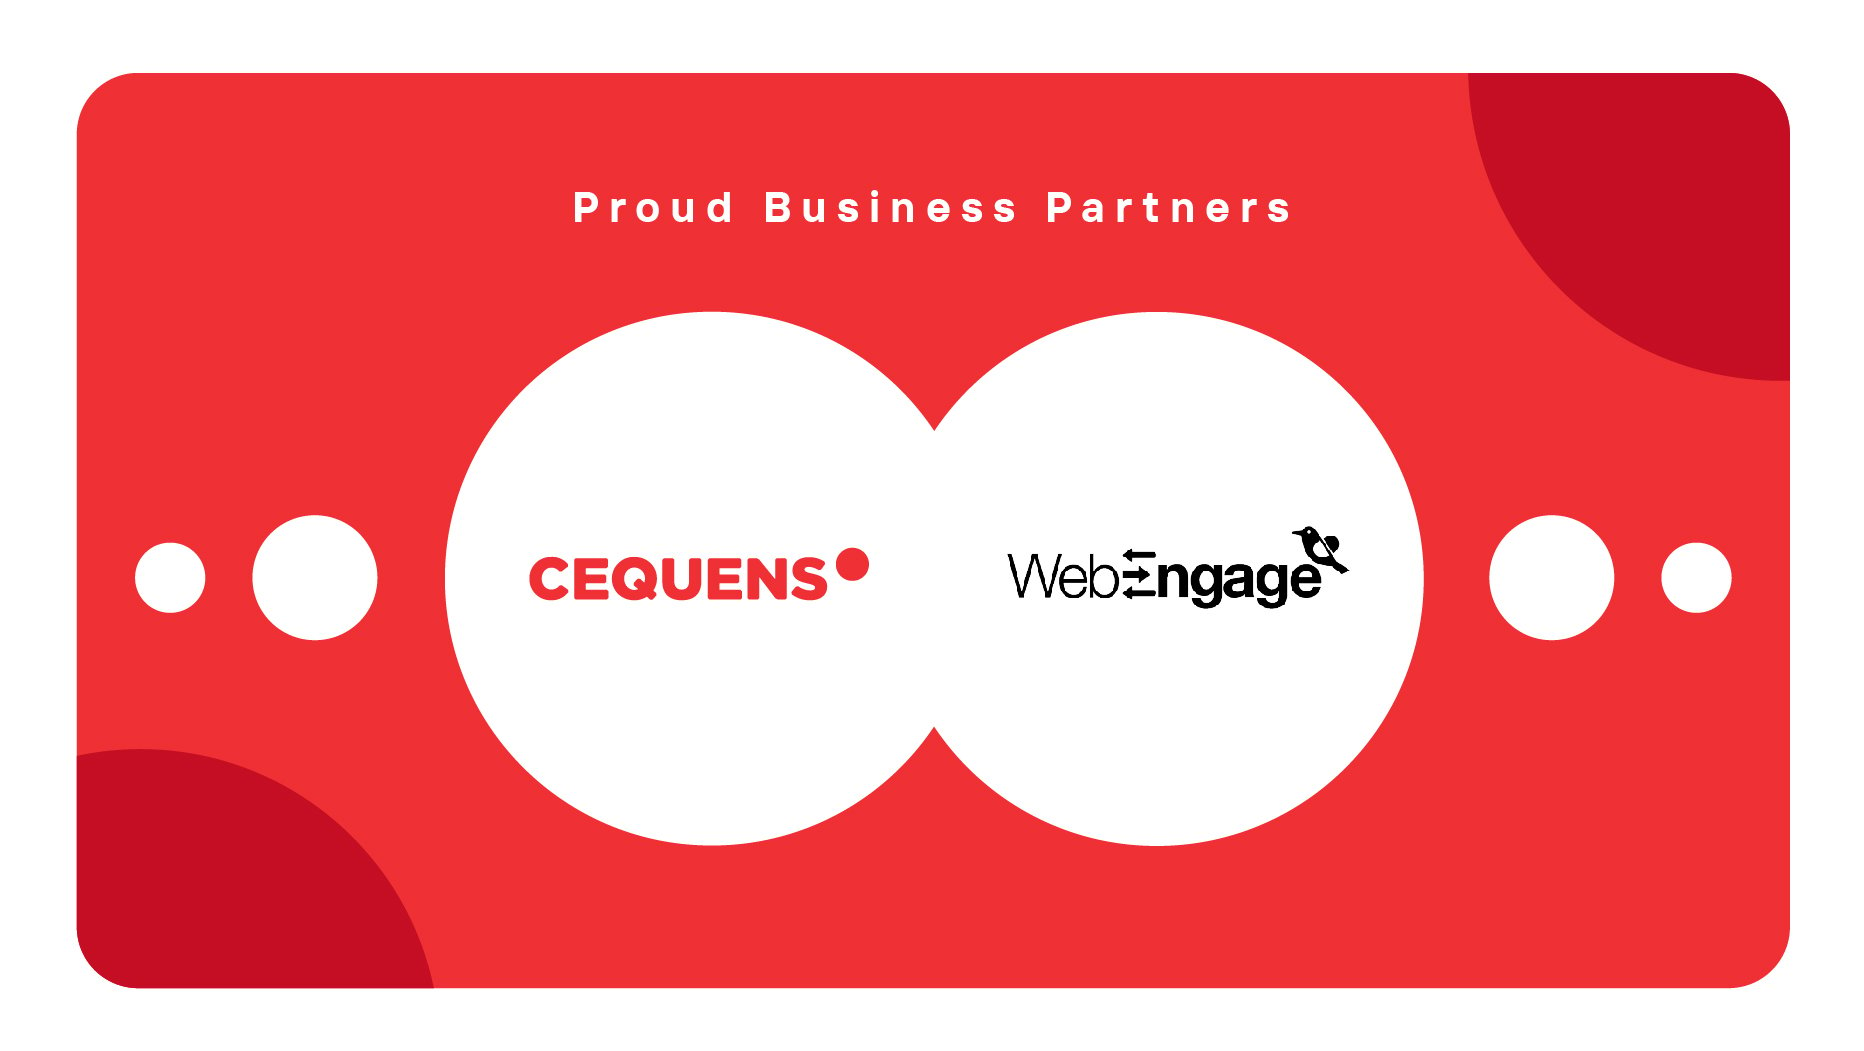 CEQUENS joins forces with WebEngage on strategic SMS partnership